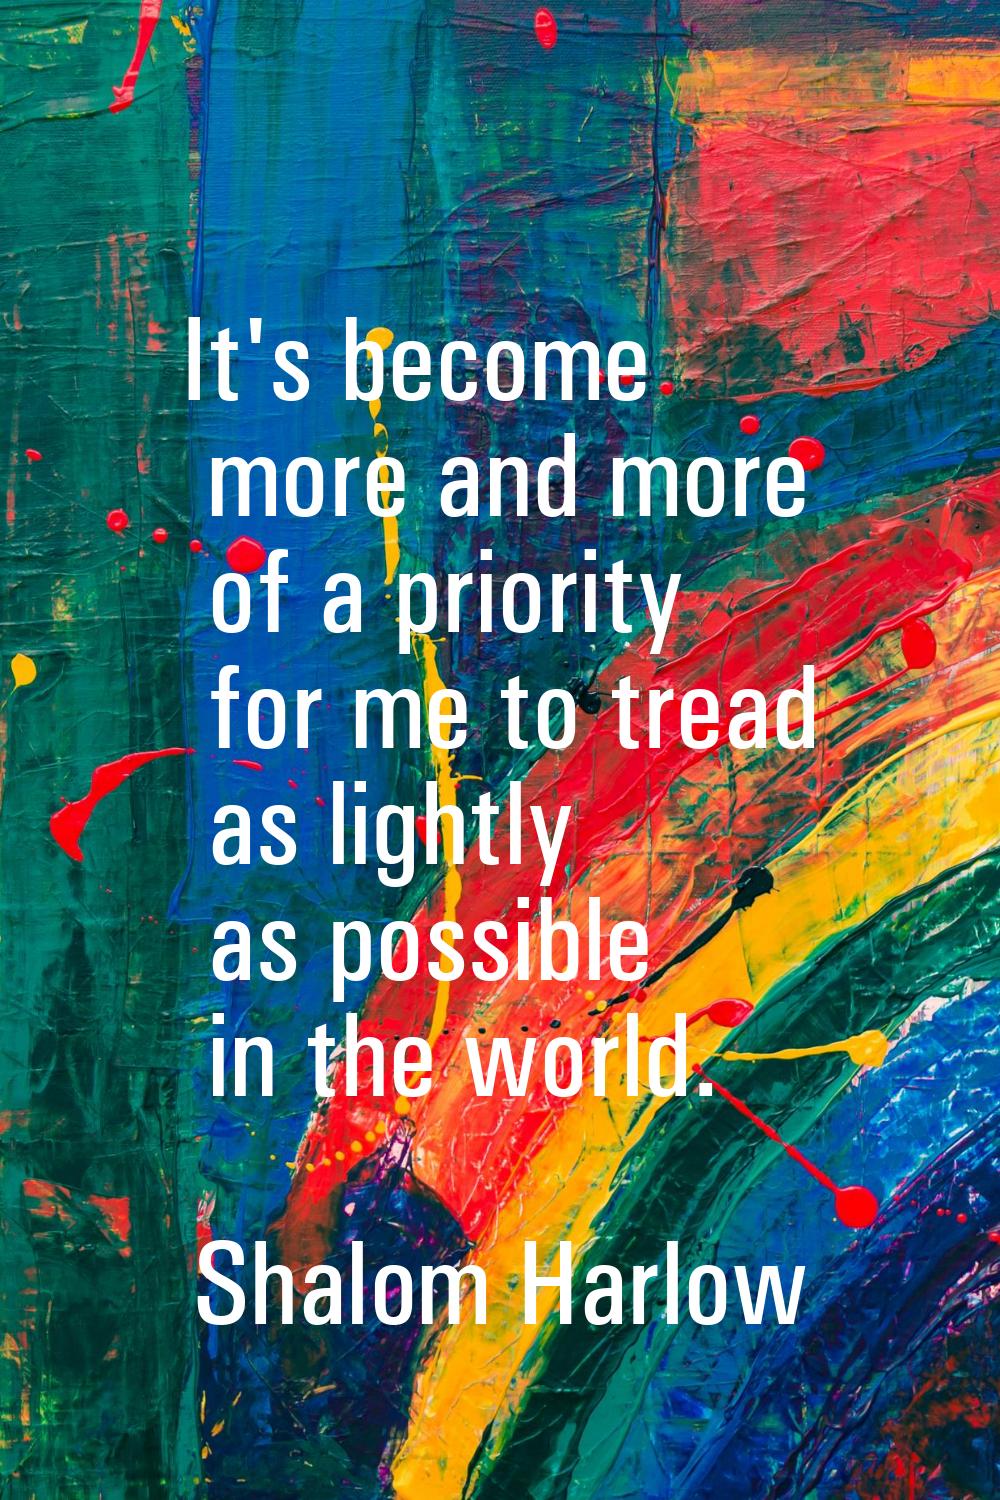 It's become more and more of a priority for me to tread as lightly as possible in the world.